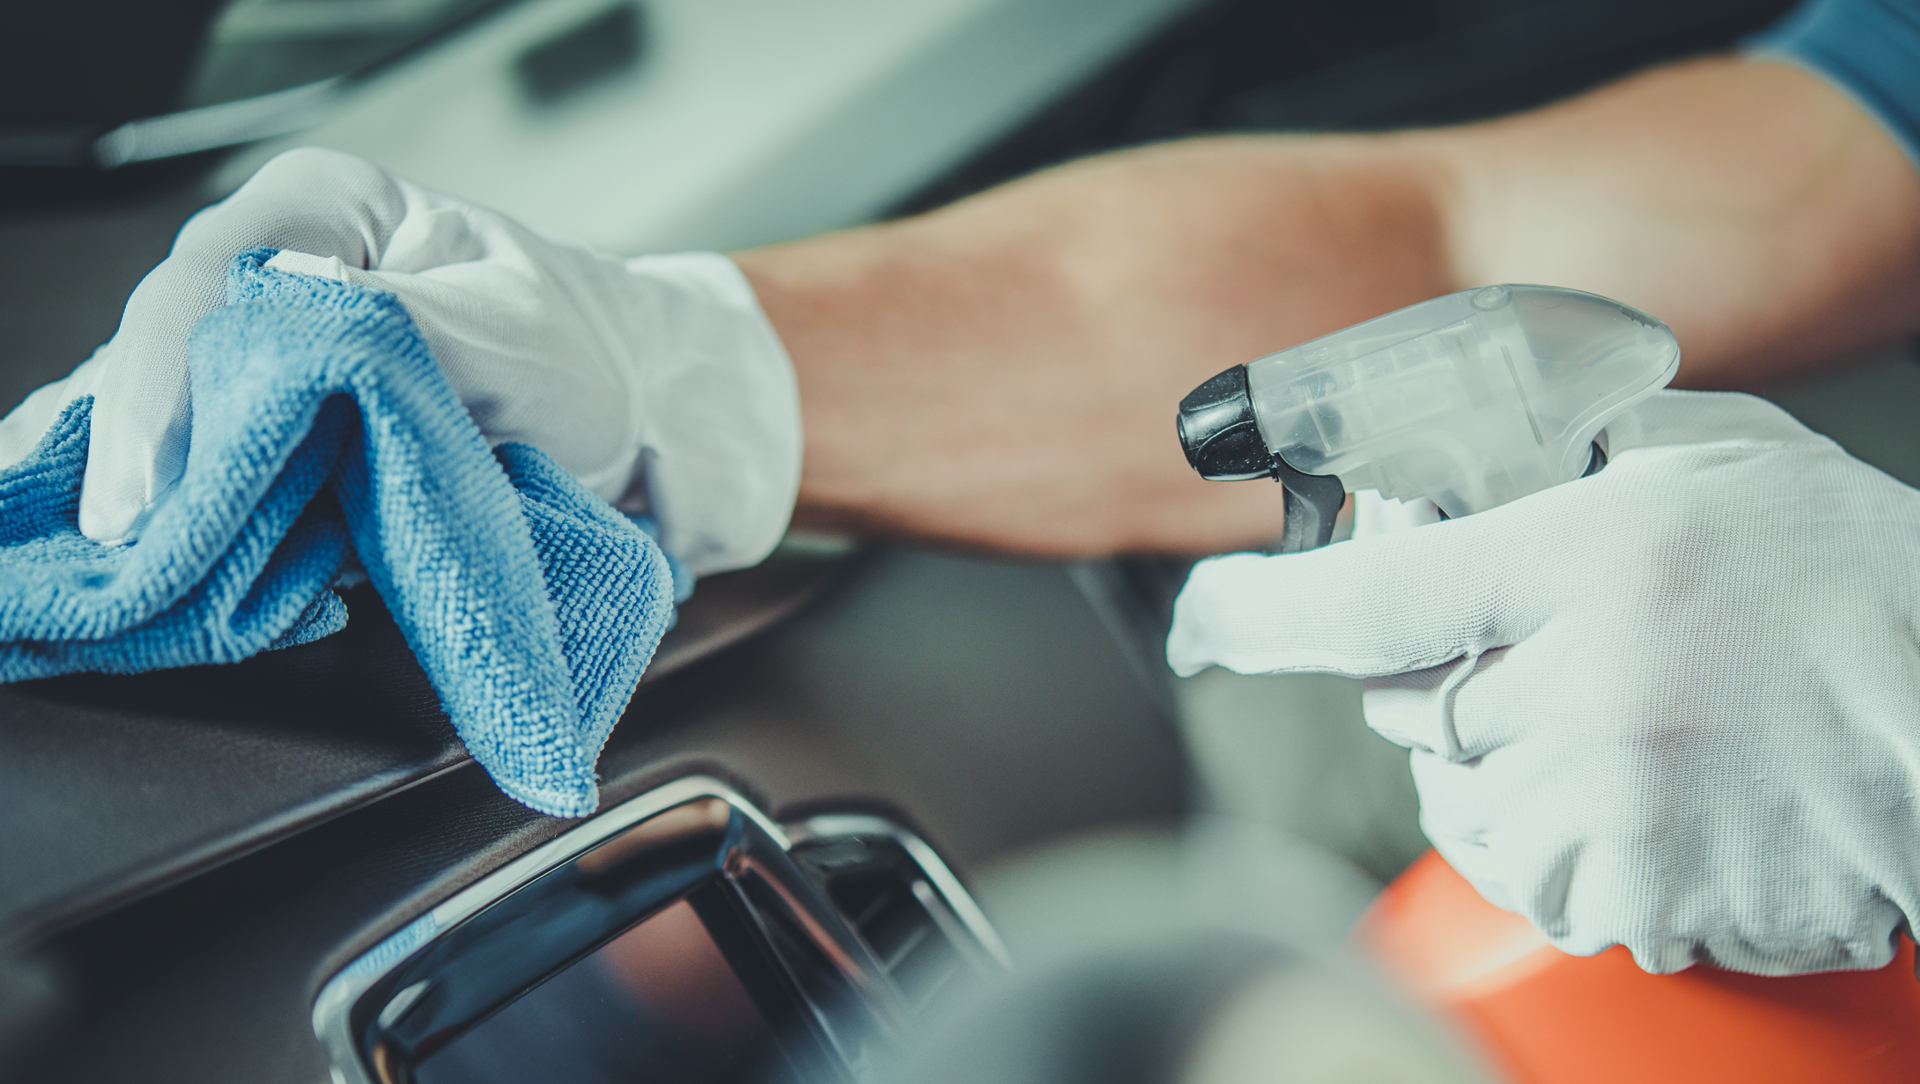 technician spraying RideKleen vehicle disinfectant, cleaning a car